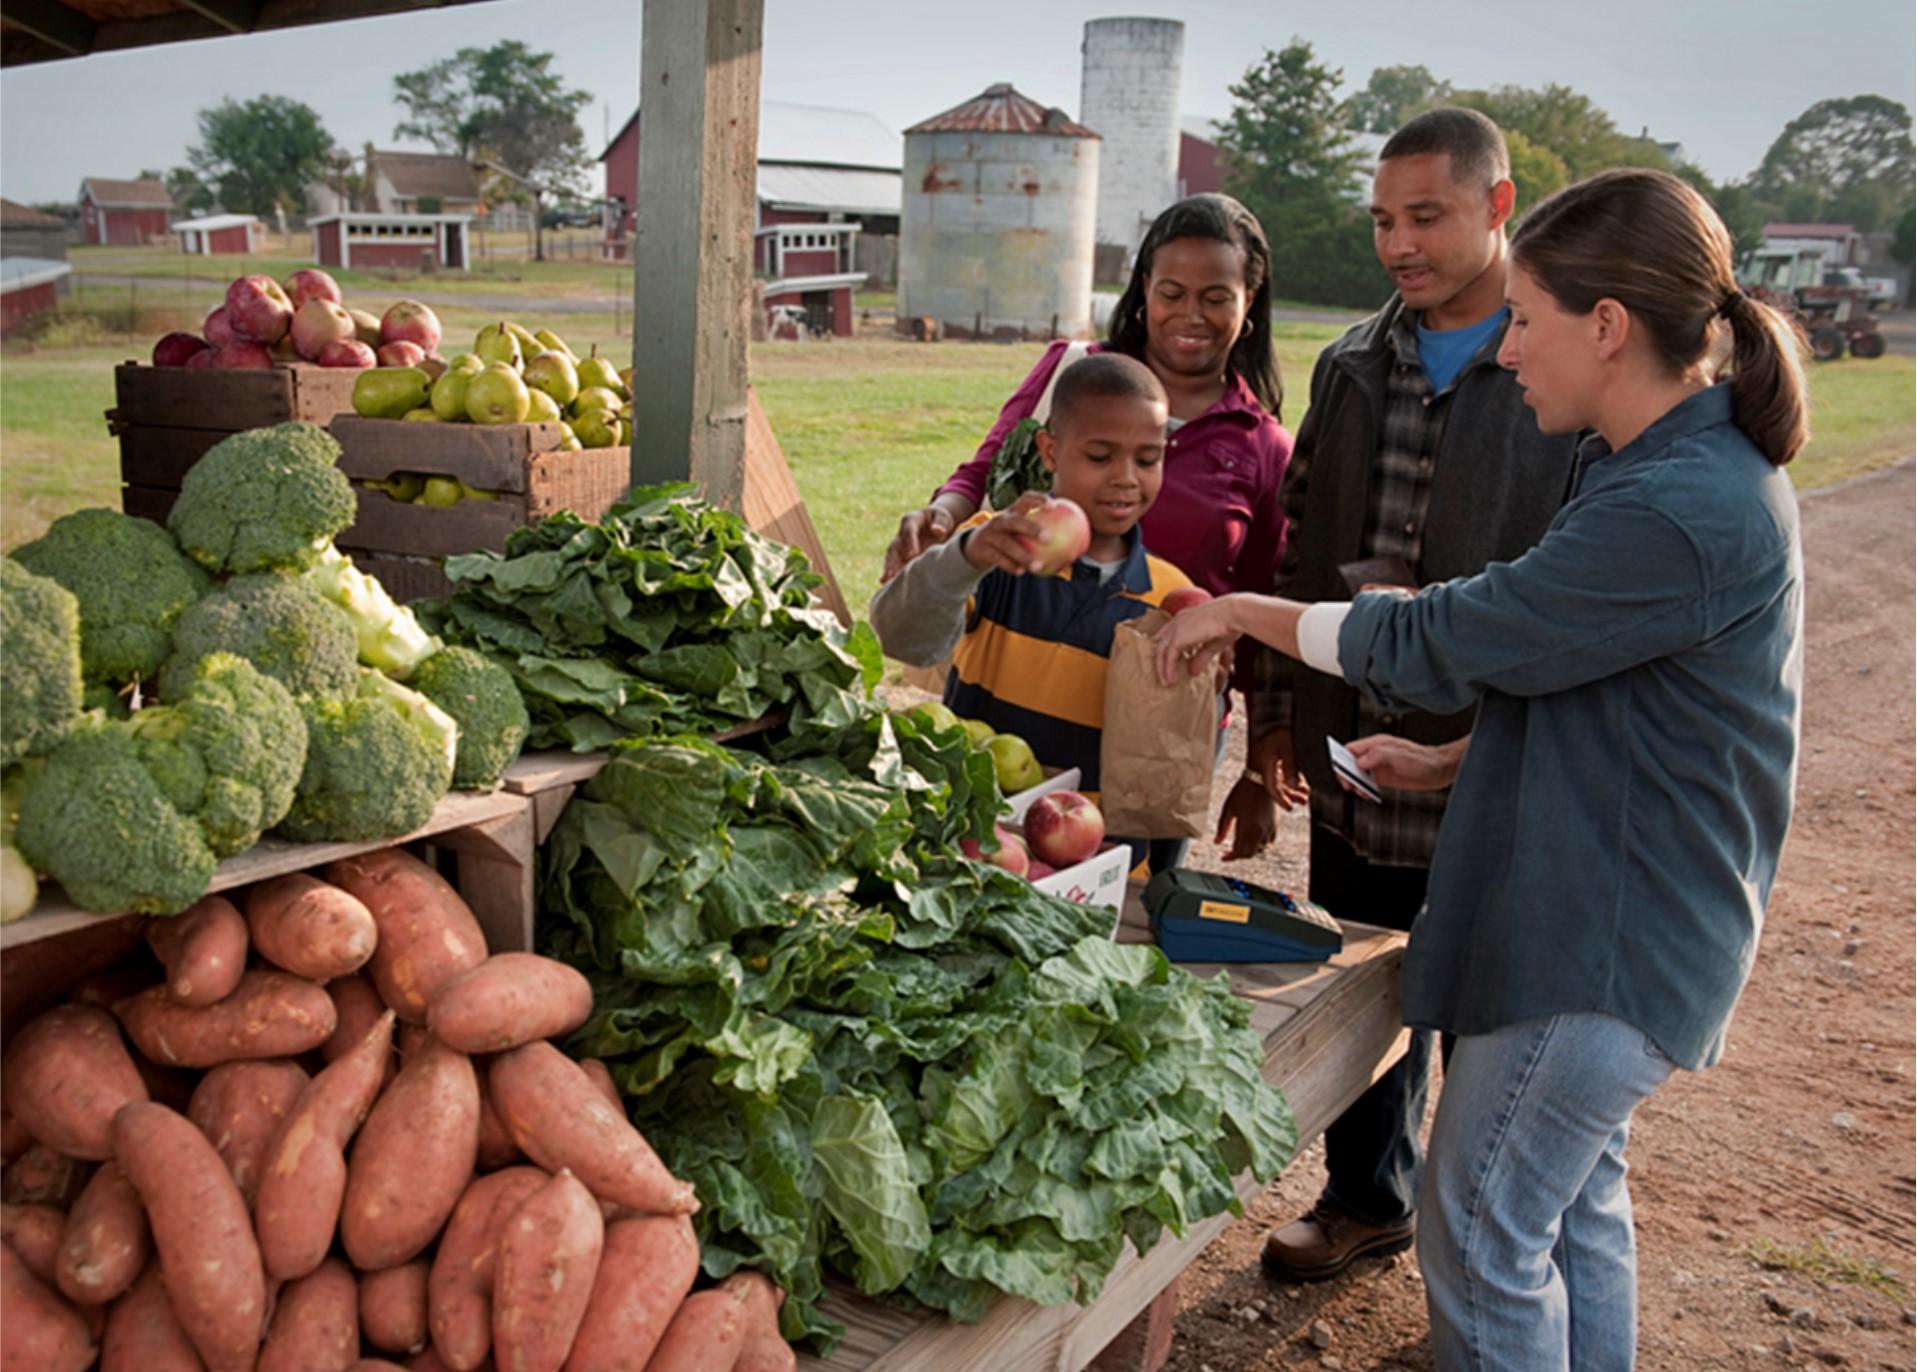 Family purchasing vegetables at farm stand